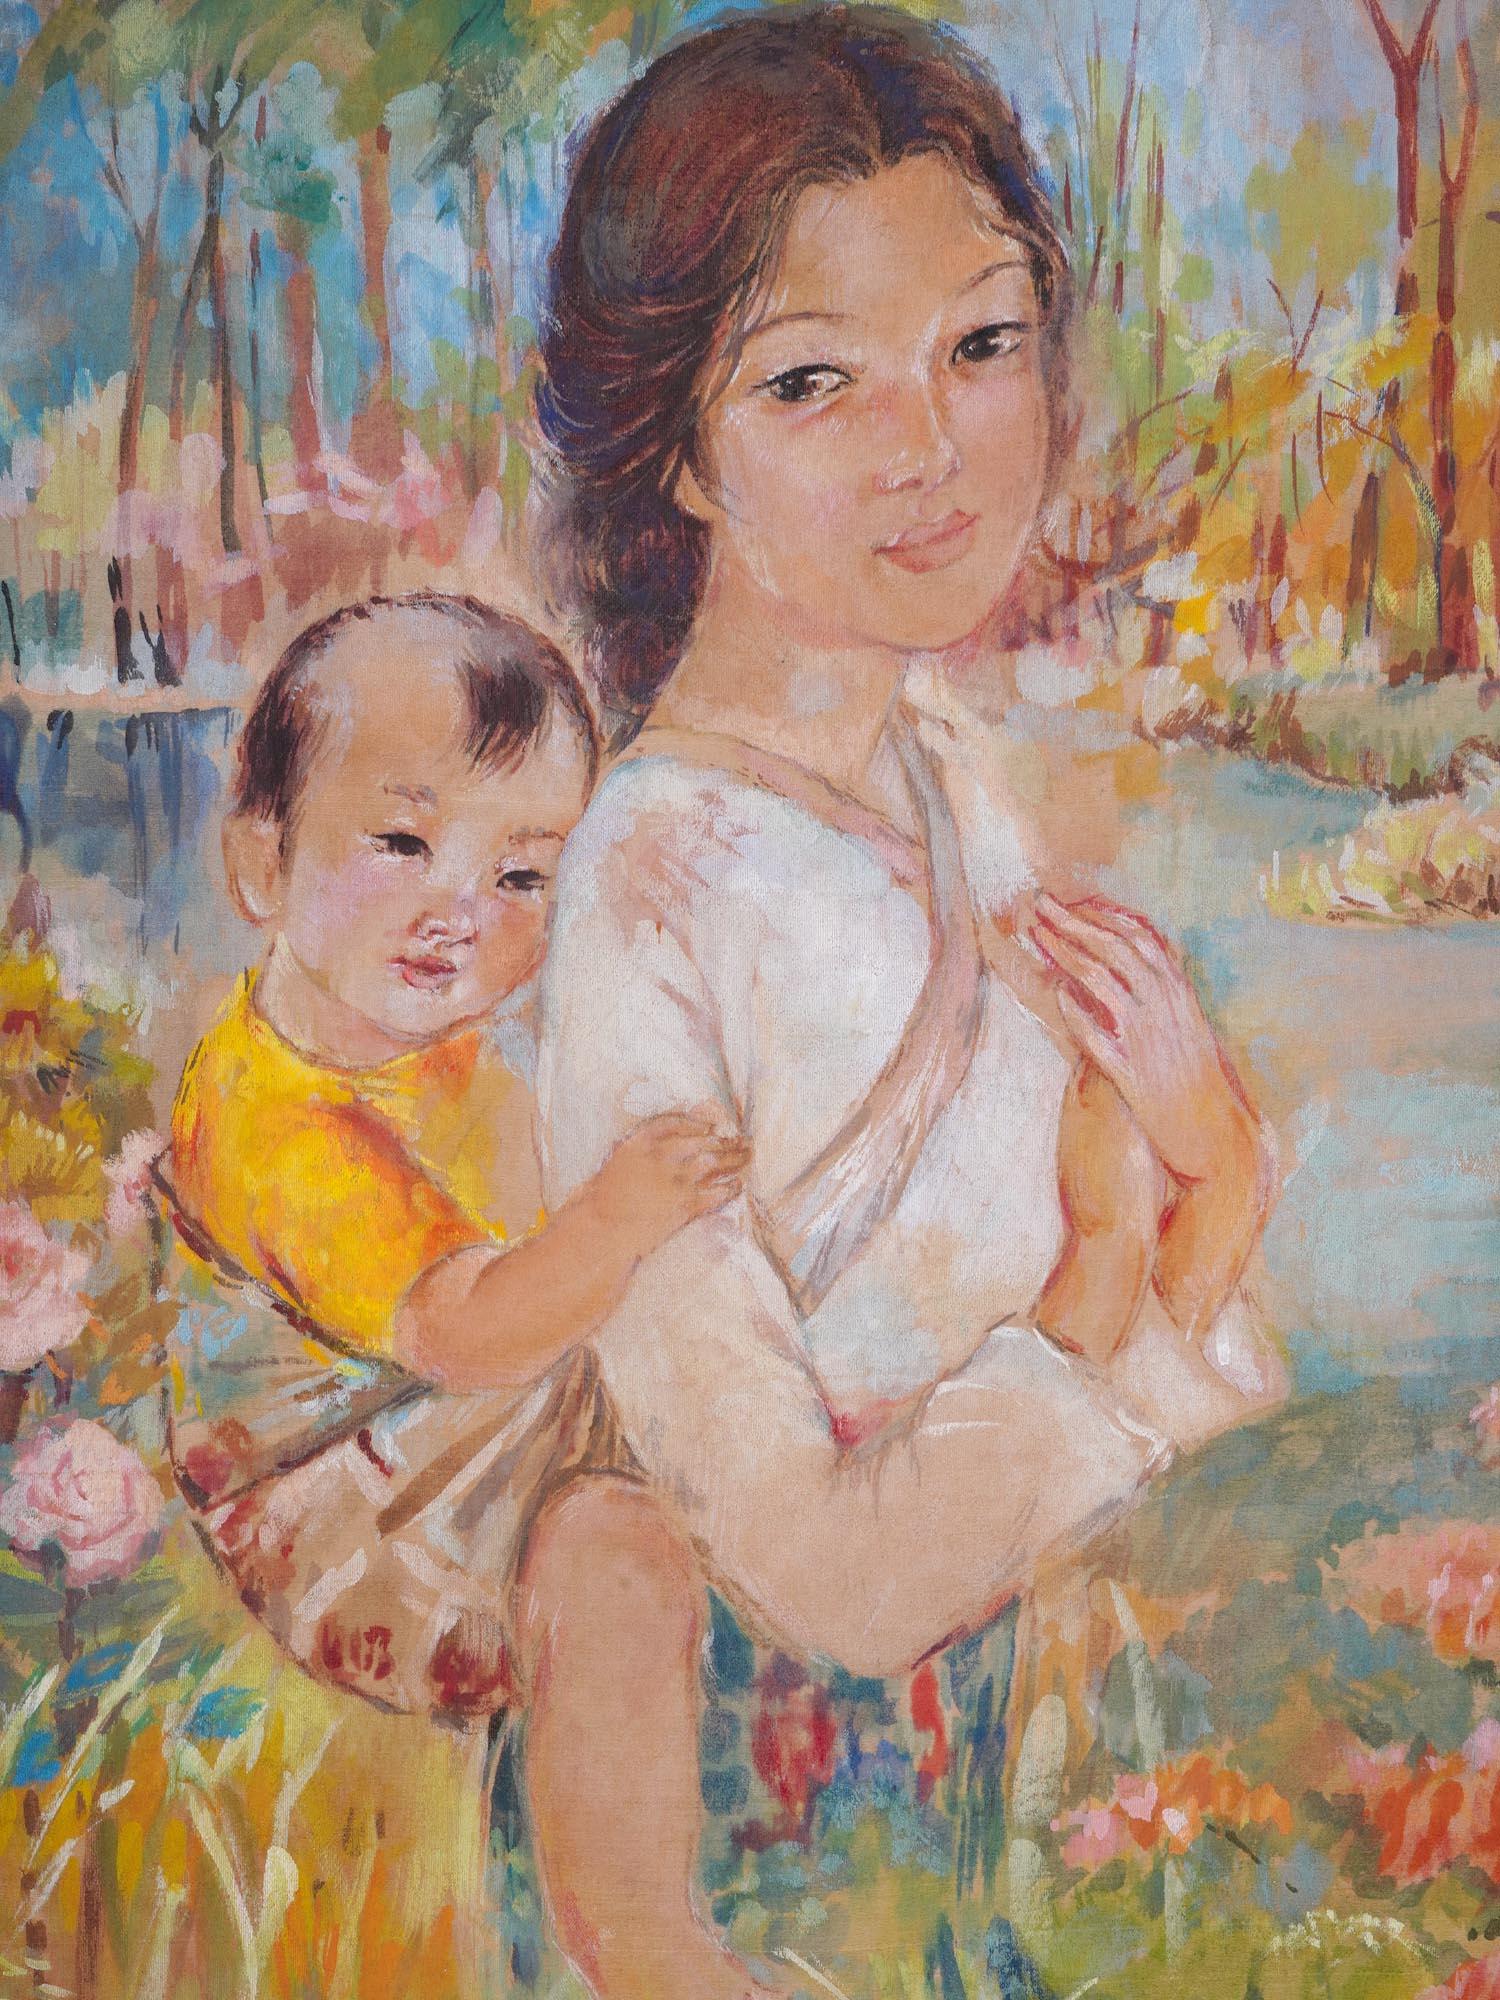 LE THI LUU VIETNAMESE MIXED MEDIA PAINTING OF MOTHER PIC-1